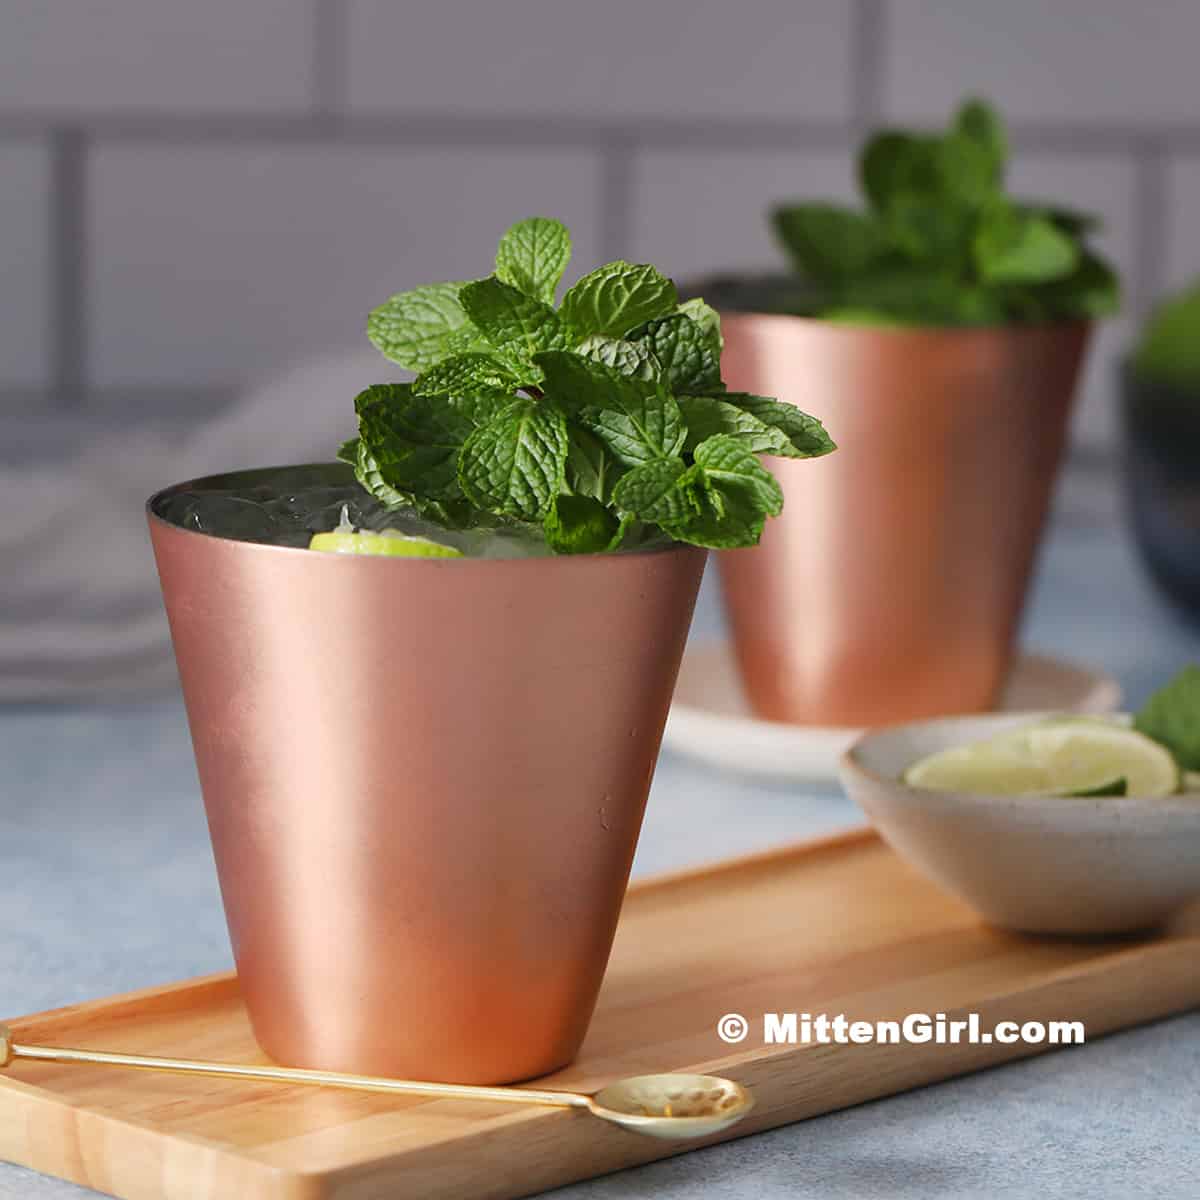 Copper cups of non-alcoholic Moscow mule mocktails, garnished with mint.